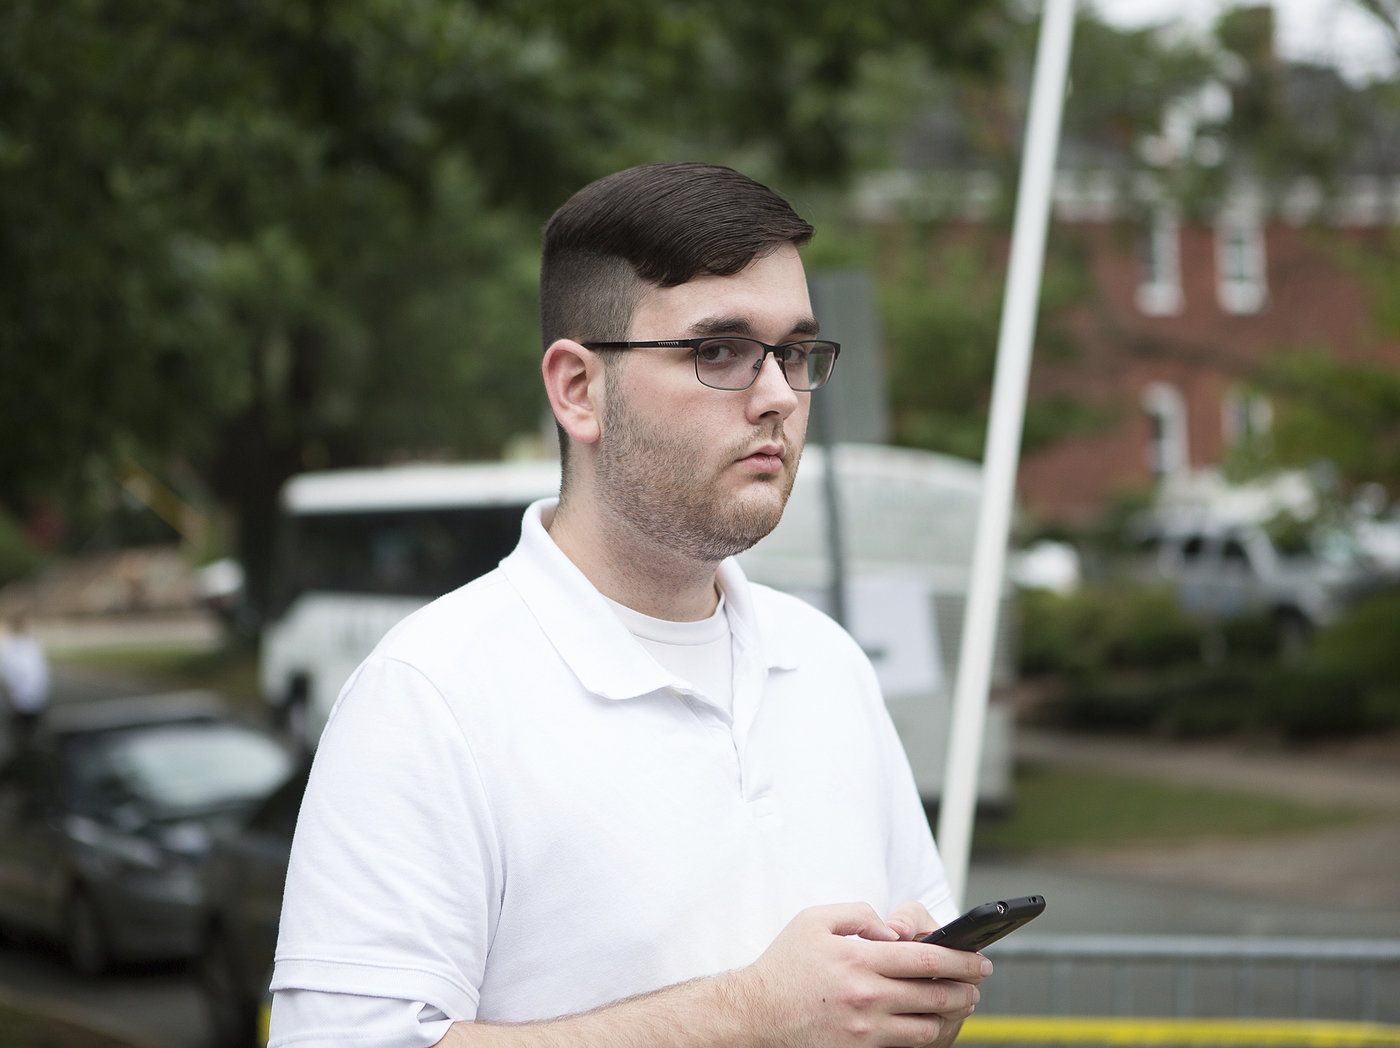 Neo-Nazi who killed Charlottesville protester is sentenced to life in prison